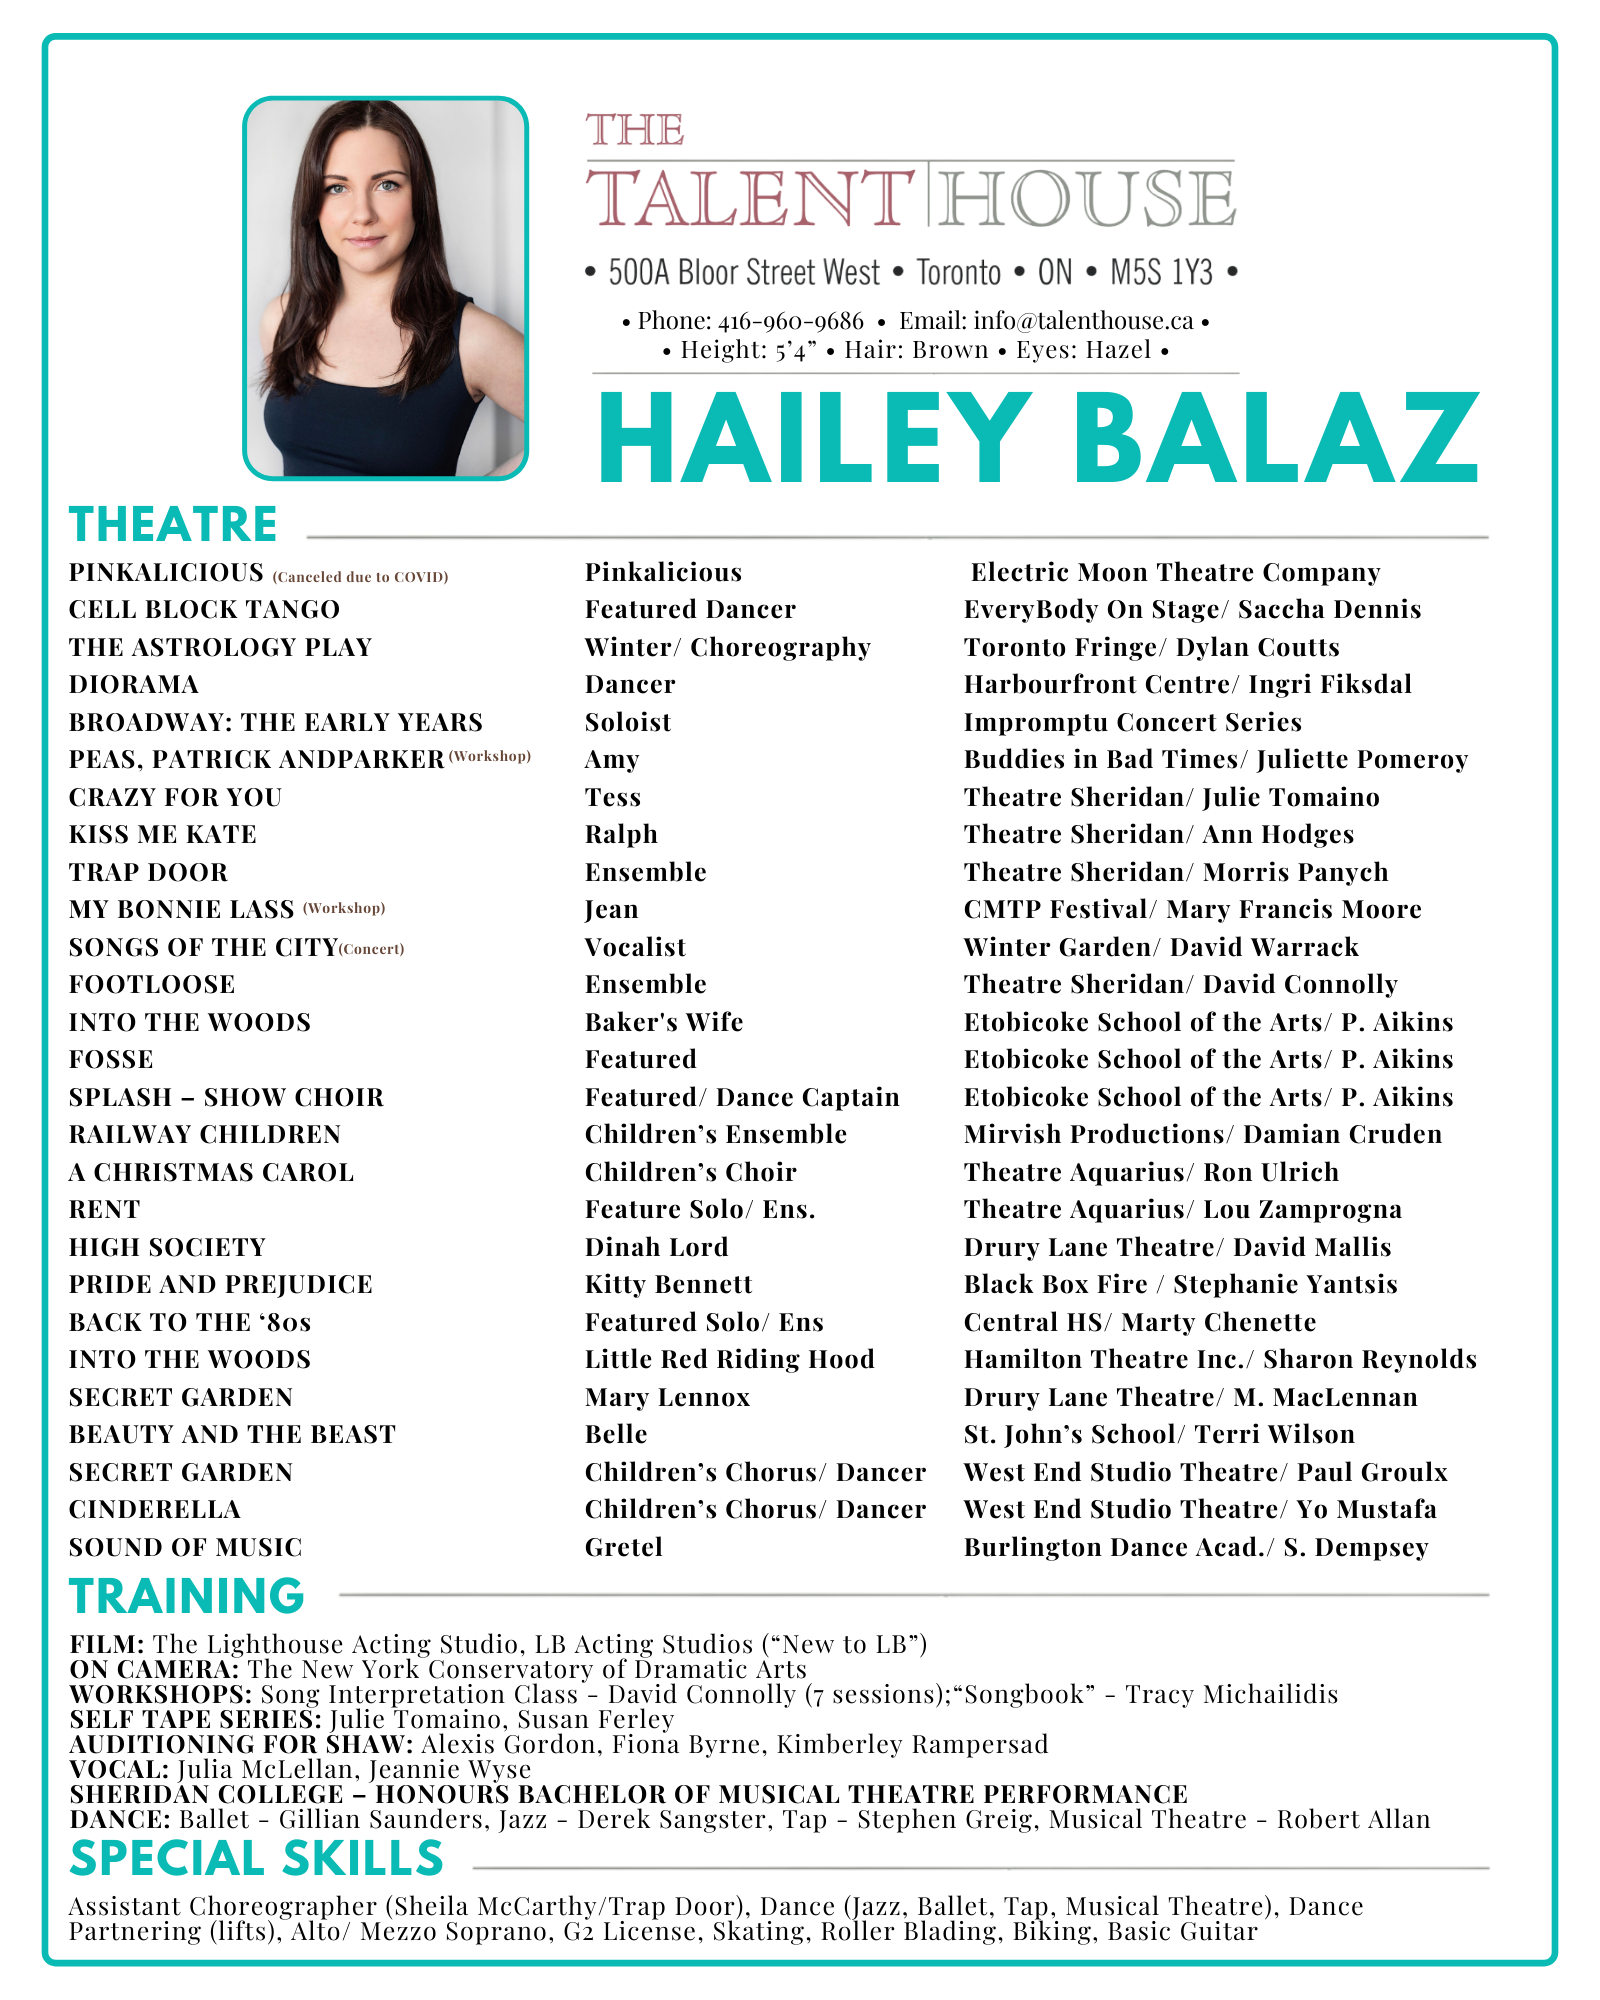 Hailey Balaz (8 × 10 in).png